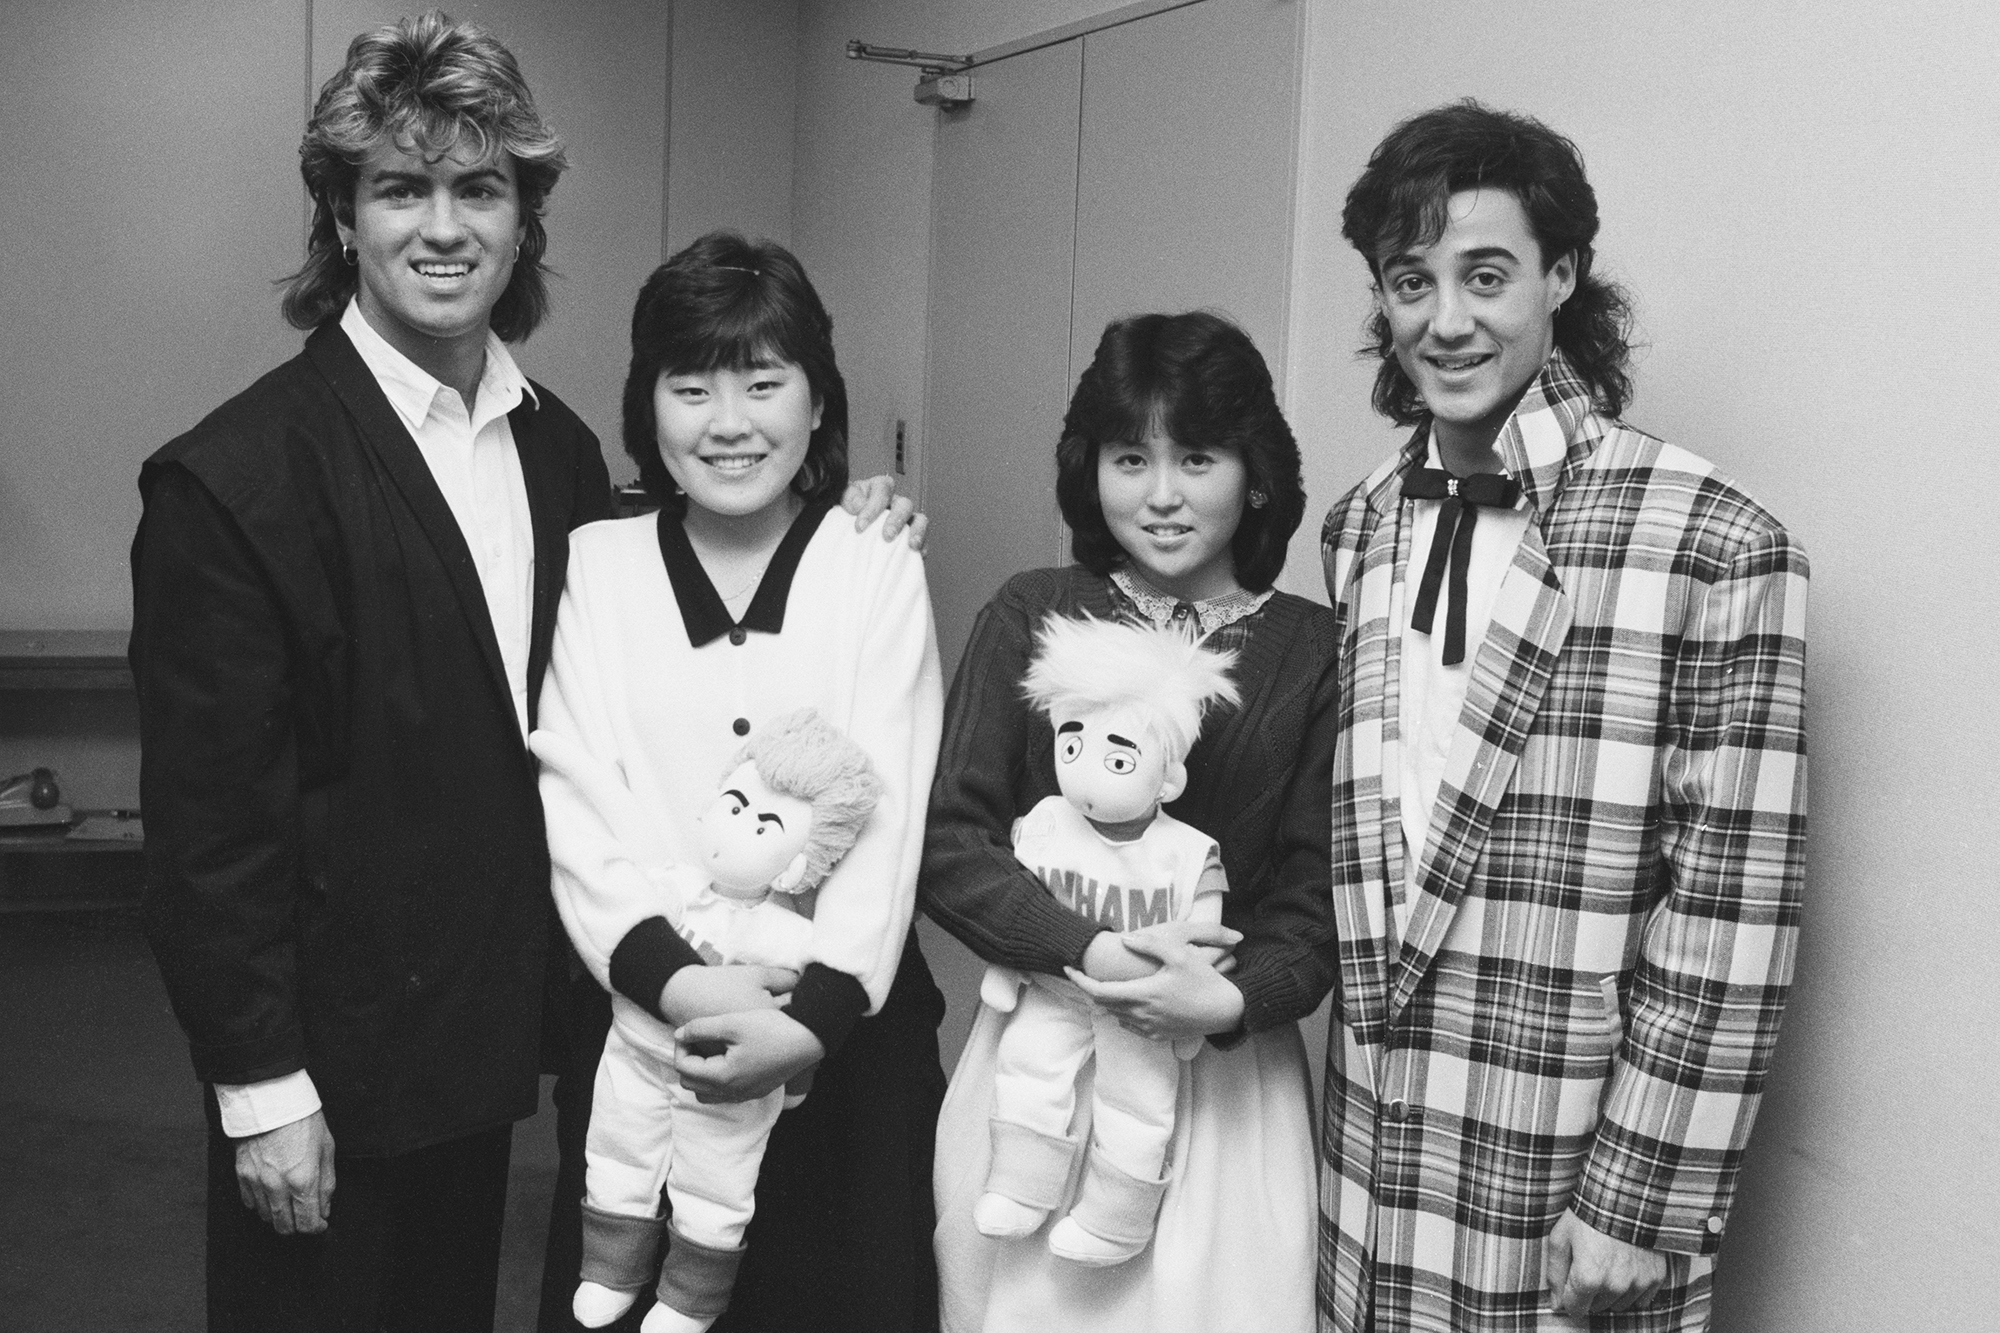 George Michael and Andrew Ridgeley of Wham!, with two fans during their 1985 world tour, in Japan, Jan. 1985.